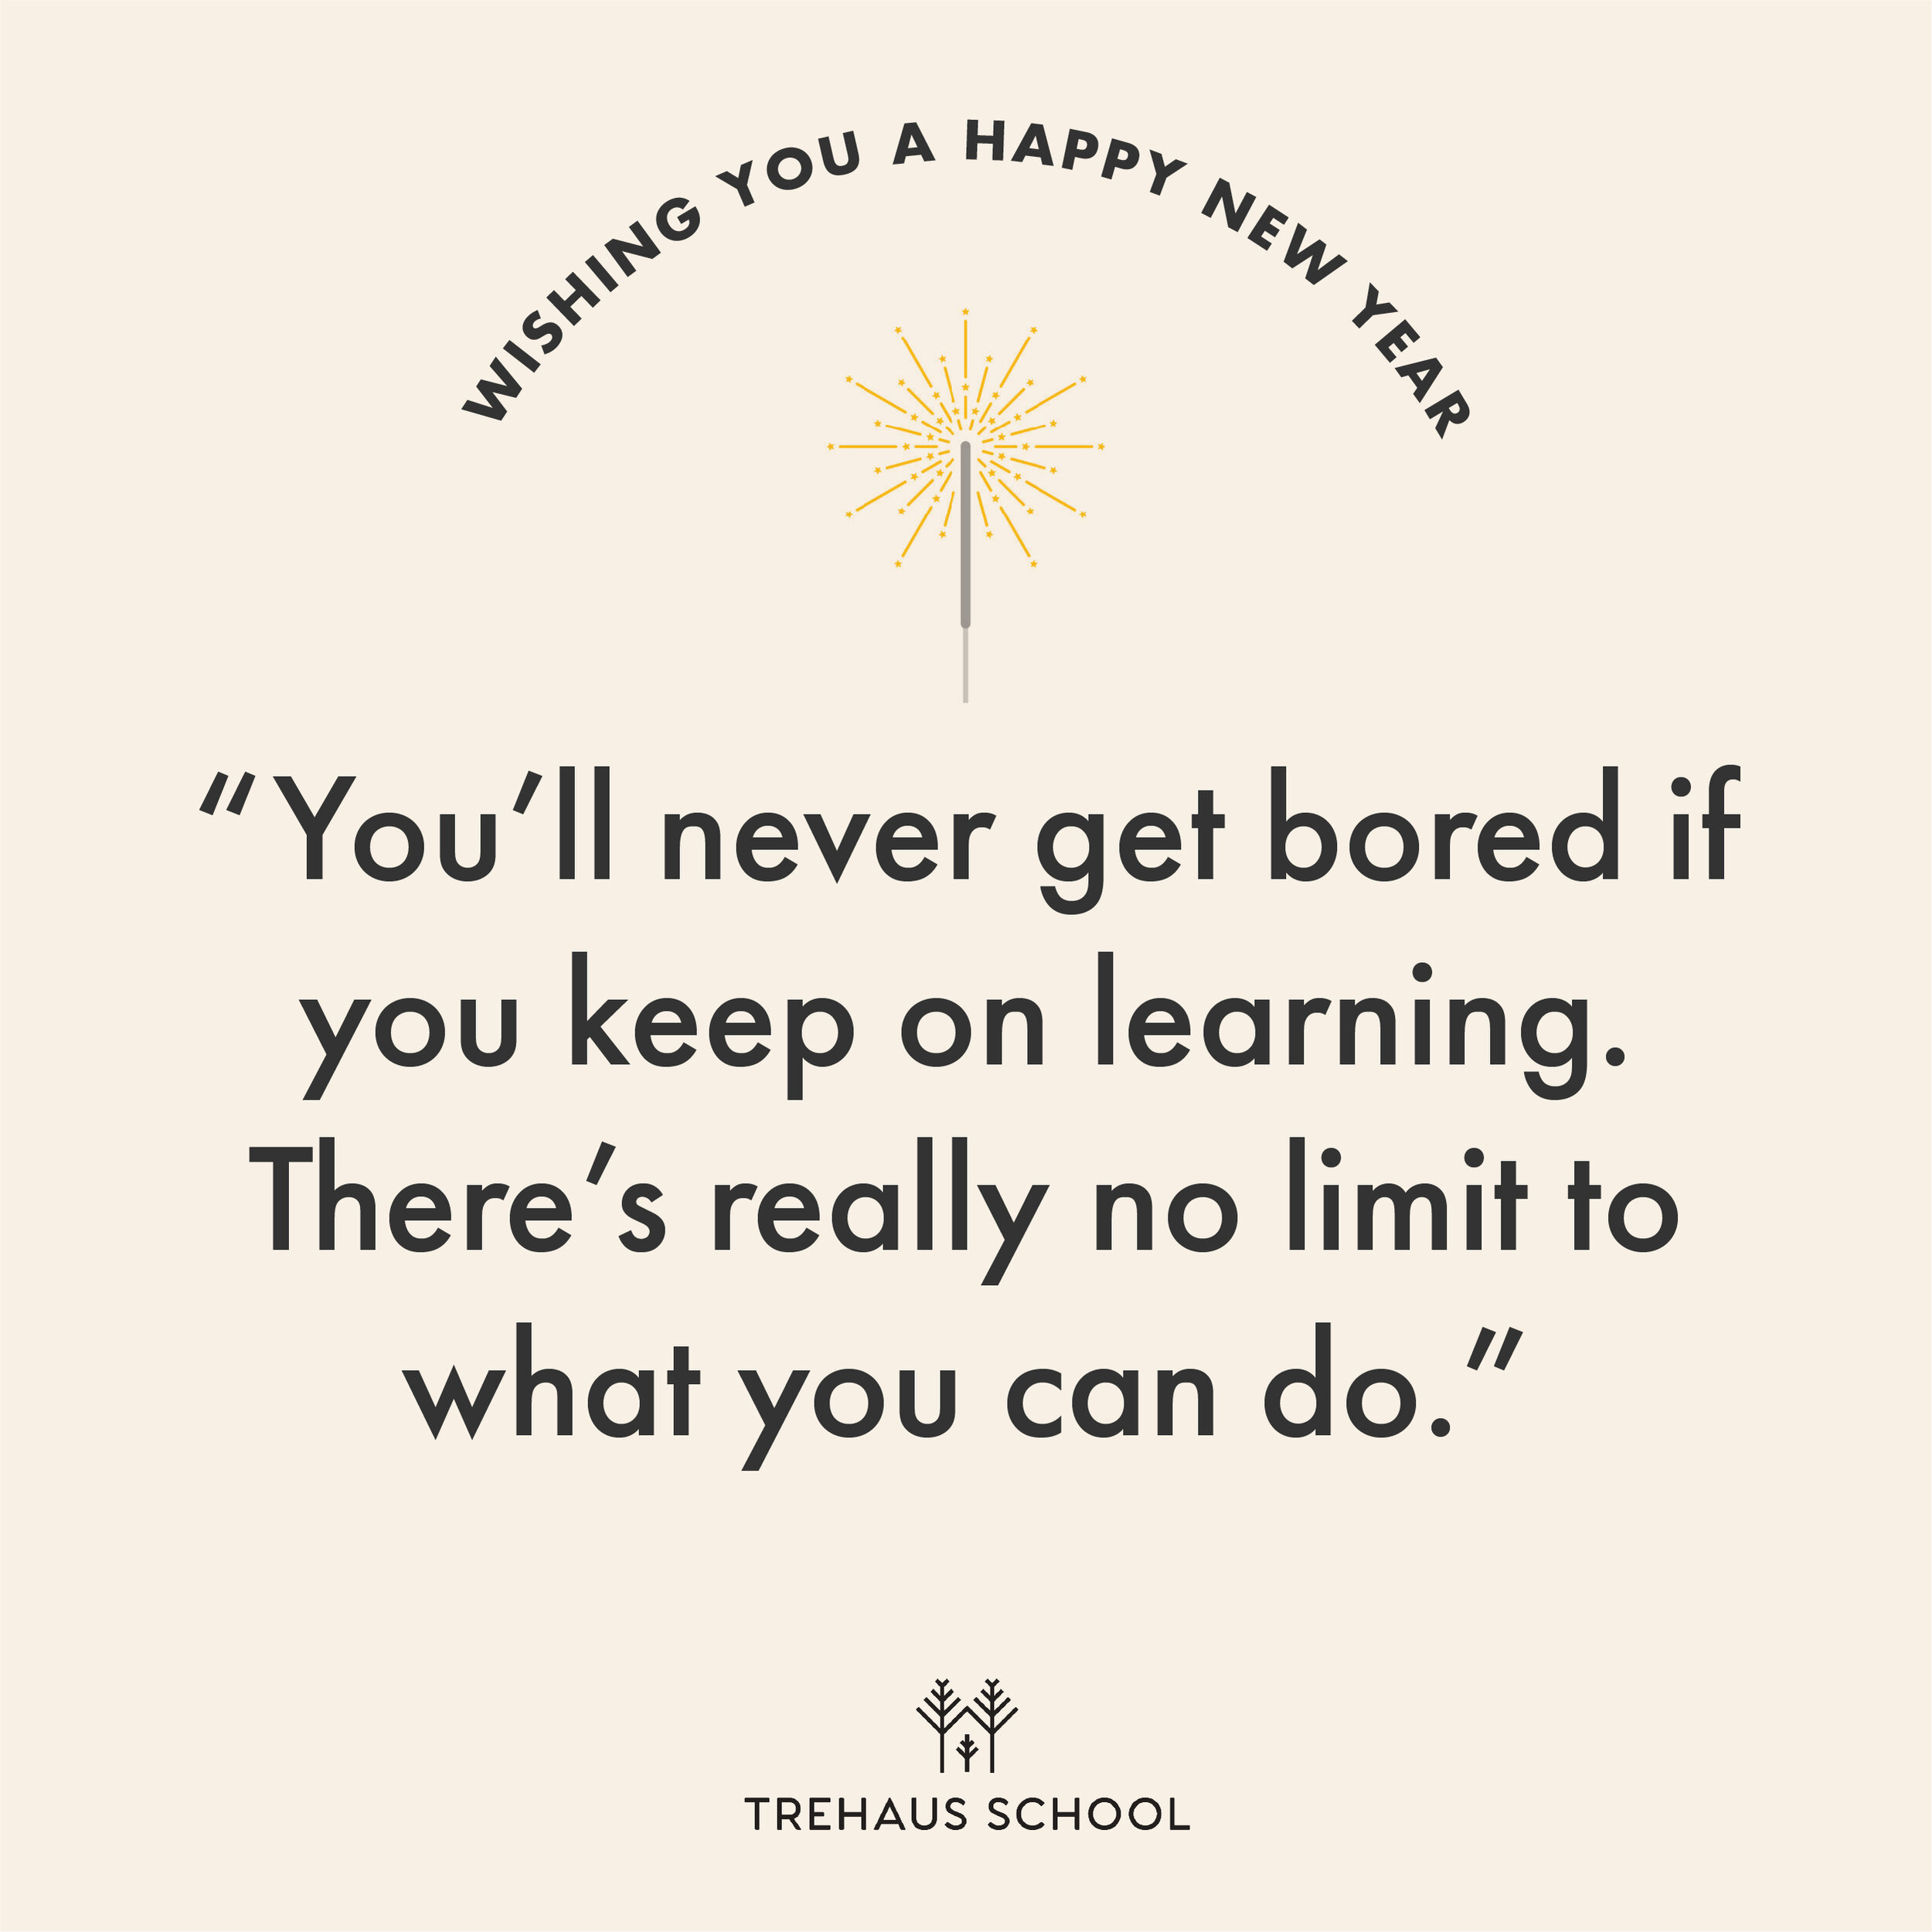 The start of the new year may feel overwhelming, but just know that doing your best is always good enough, keep on trying, keep on learning.⁣
⁣
Whatever 2022 brings, you&rsquo;ve got this, and we&rsquo;ve got you.⁣
⁣
Happy 2022 from the Trehaus Schoo